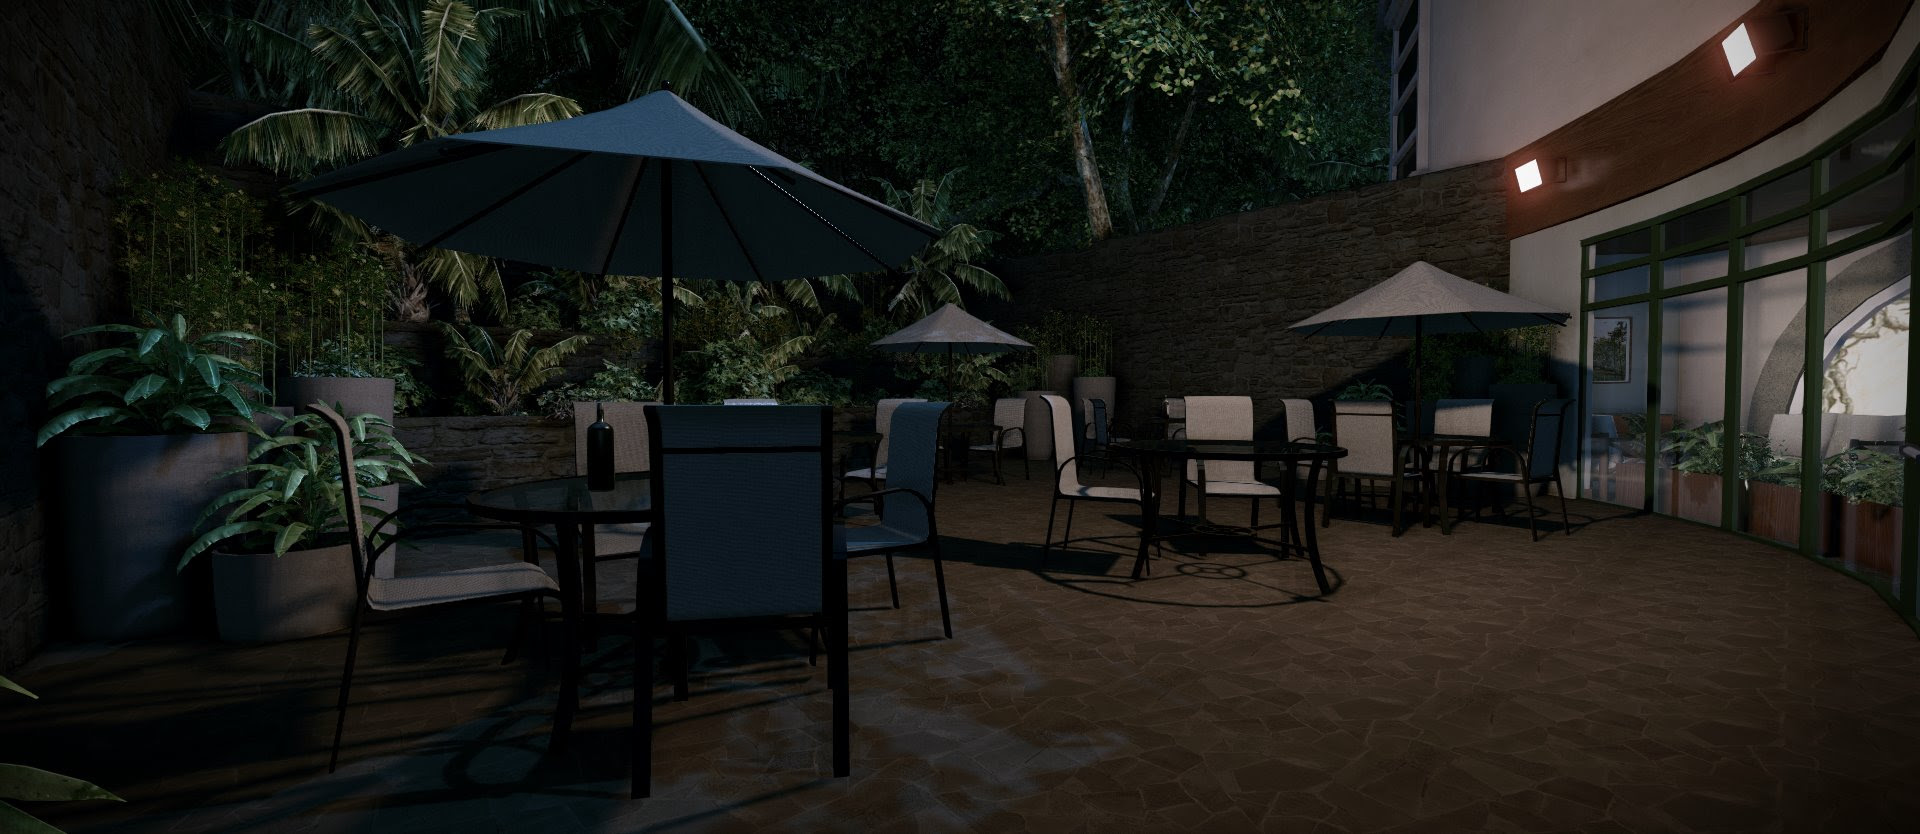 Jurassic Park Aftermath New Screenshots Show off the Cretaceous Cafe